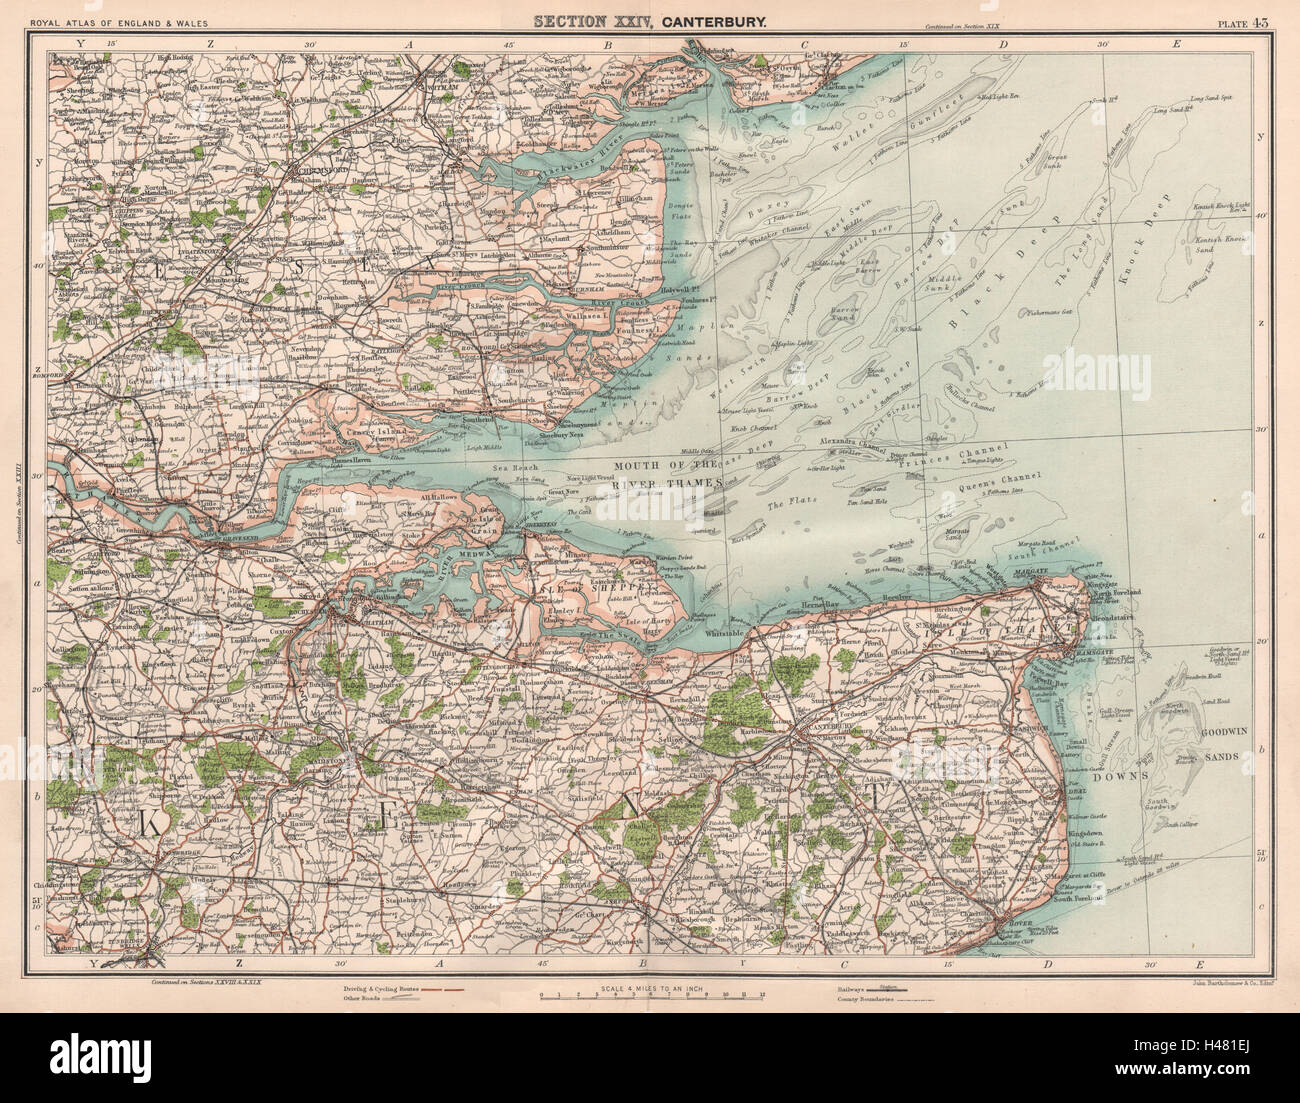 THAMES ESTUARY. Channels sands Medway Kent Essex Thanet Canterbury 1898 map Stock Photo